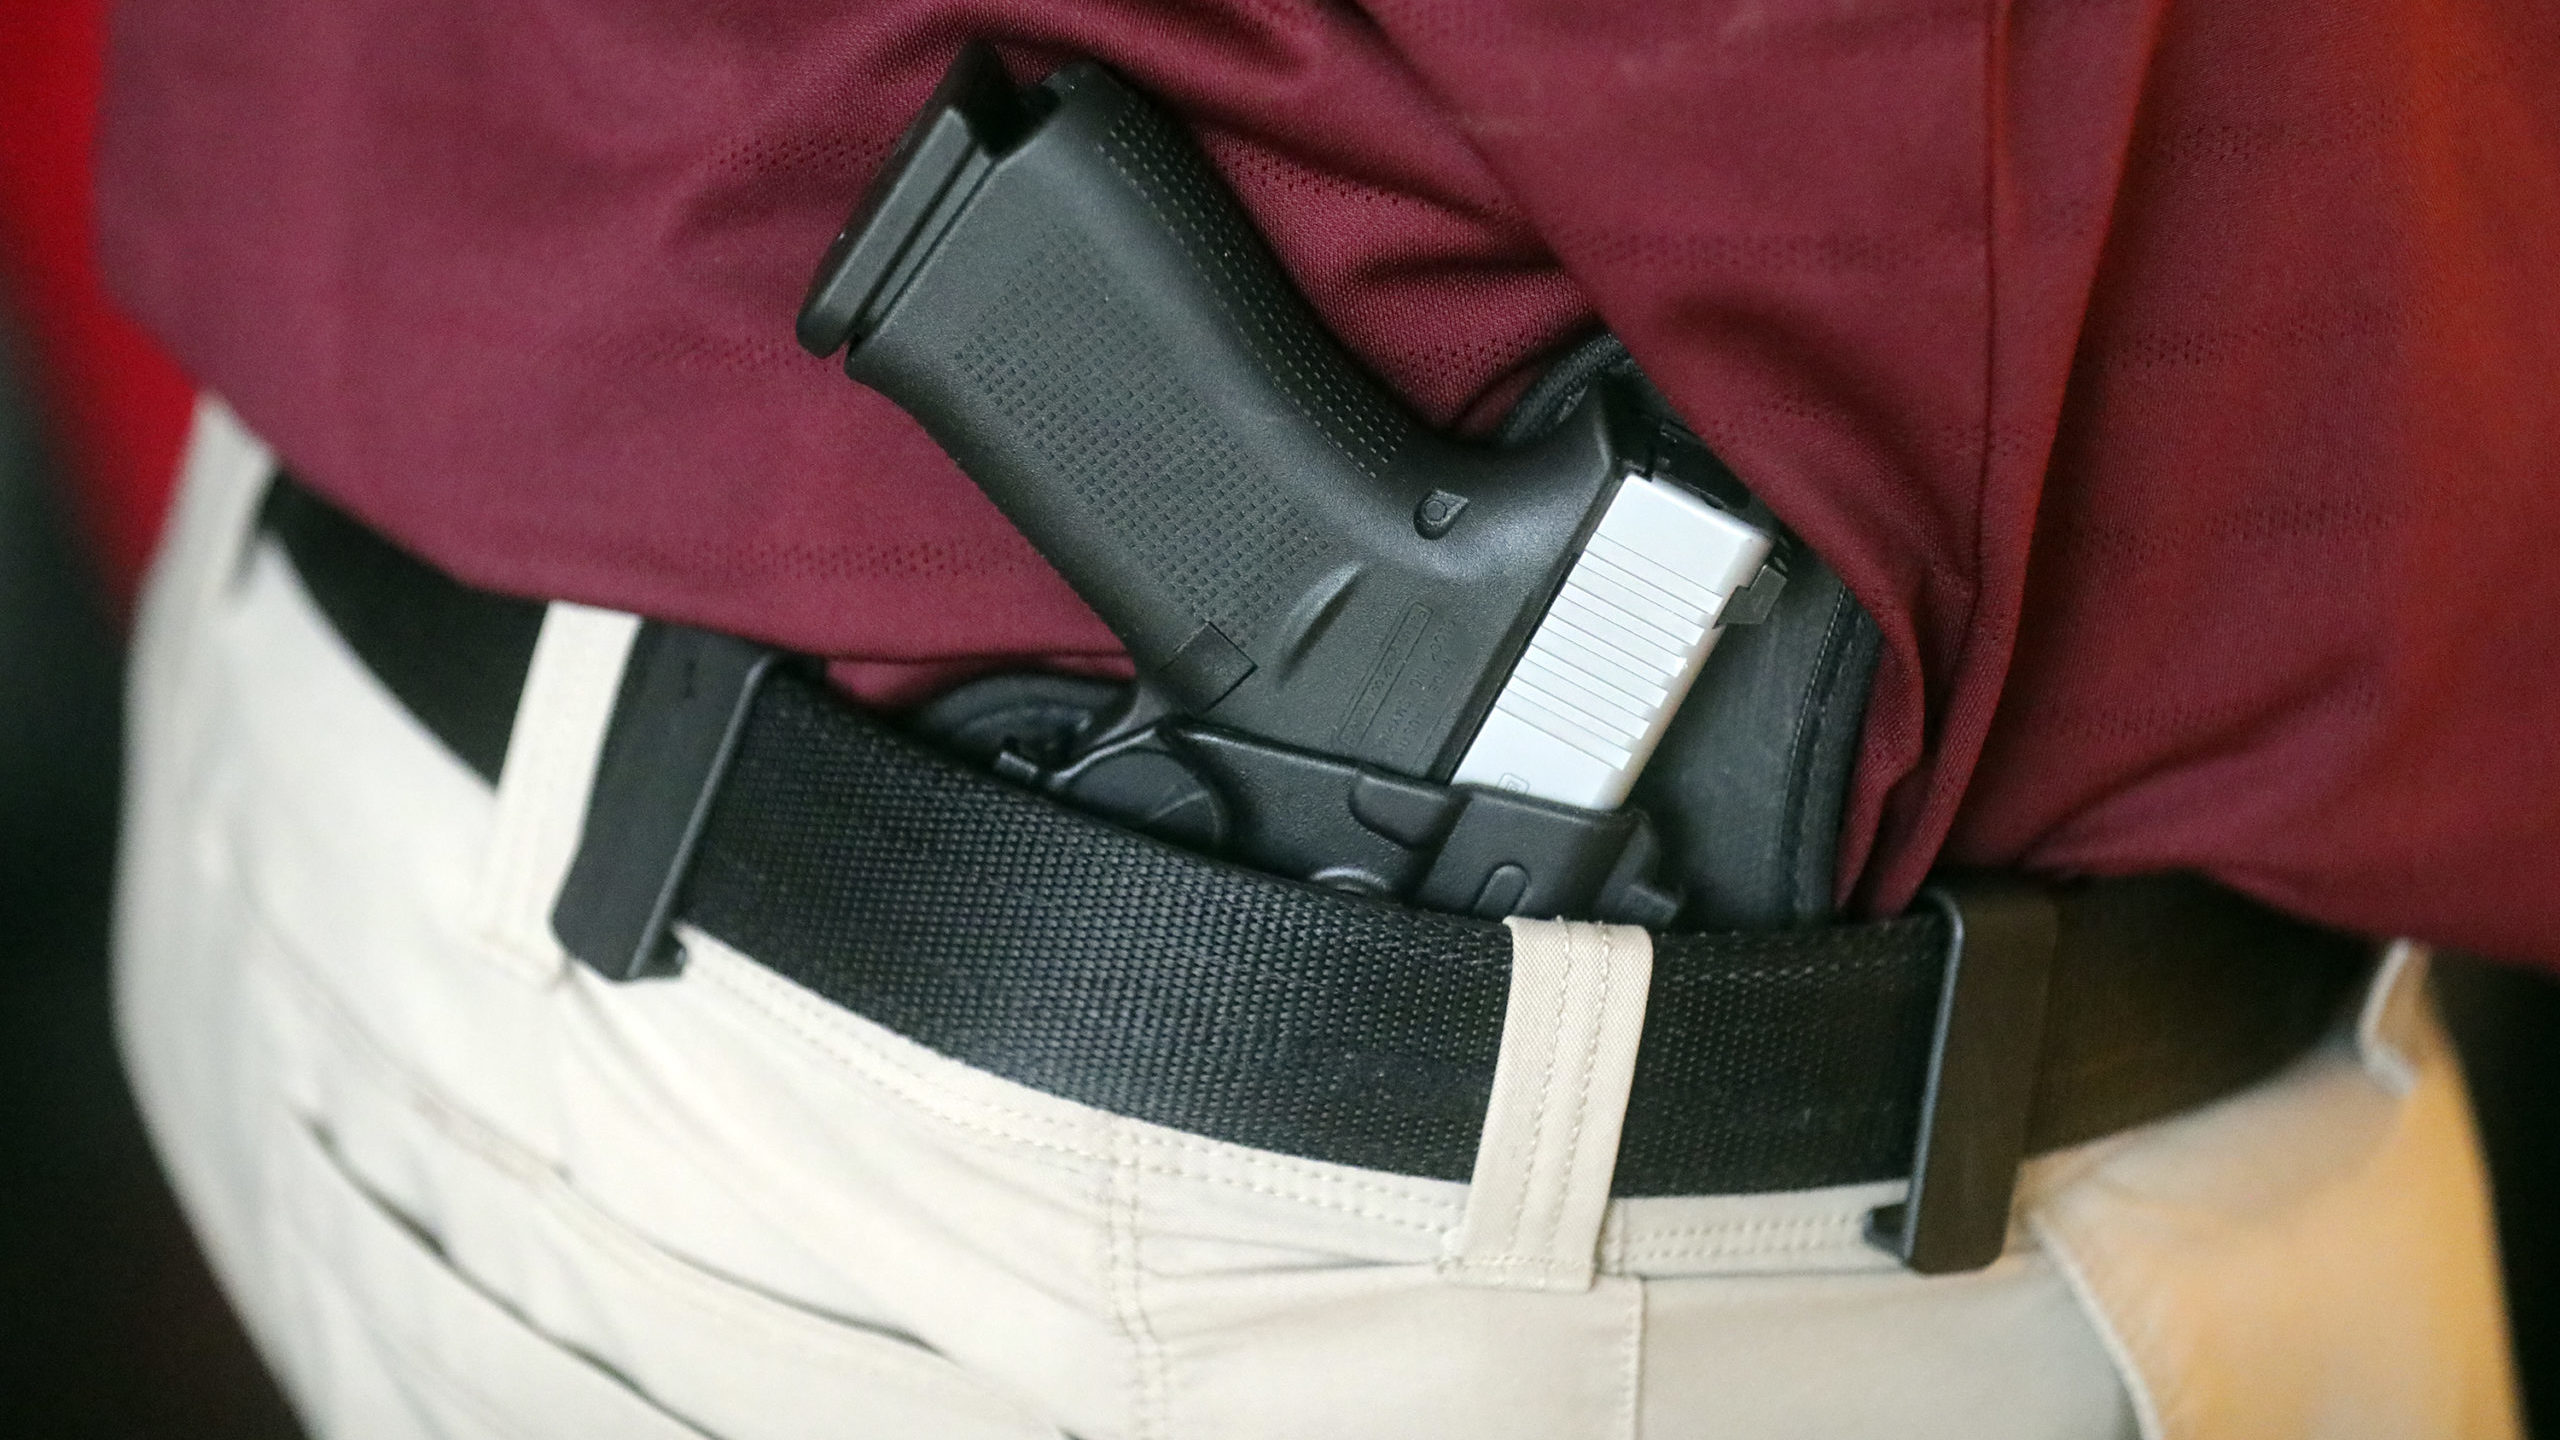 Utah Sen. Mike Lee has joined an effort to make concealed carry permits in Utah viable in any state...